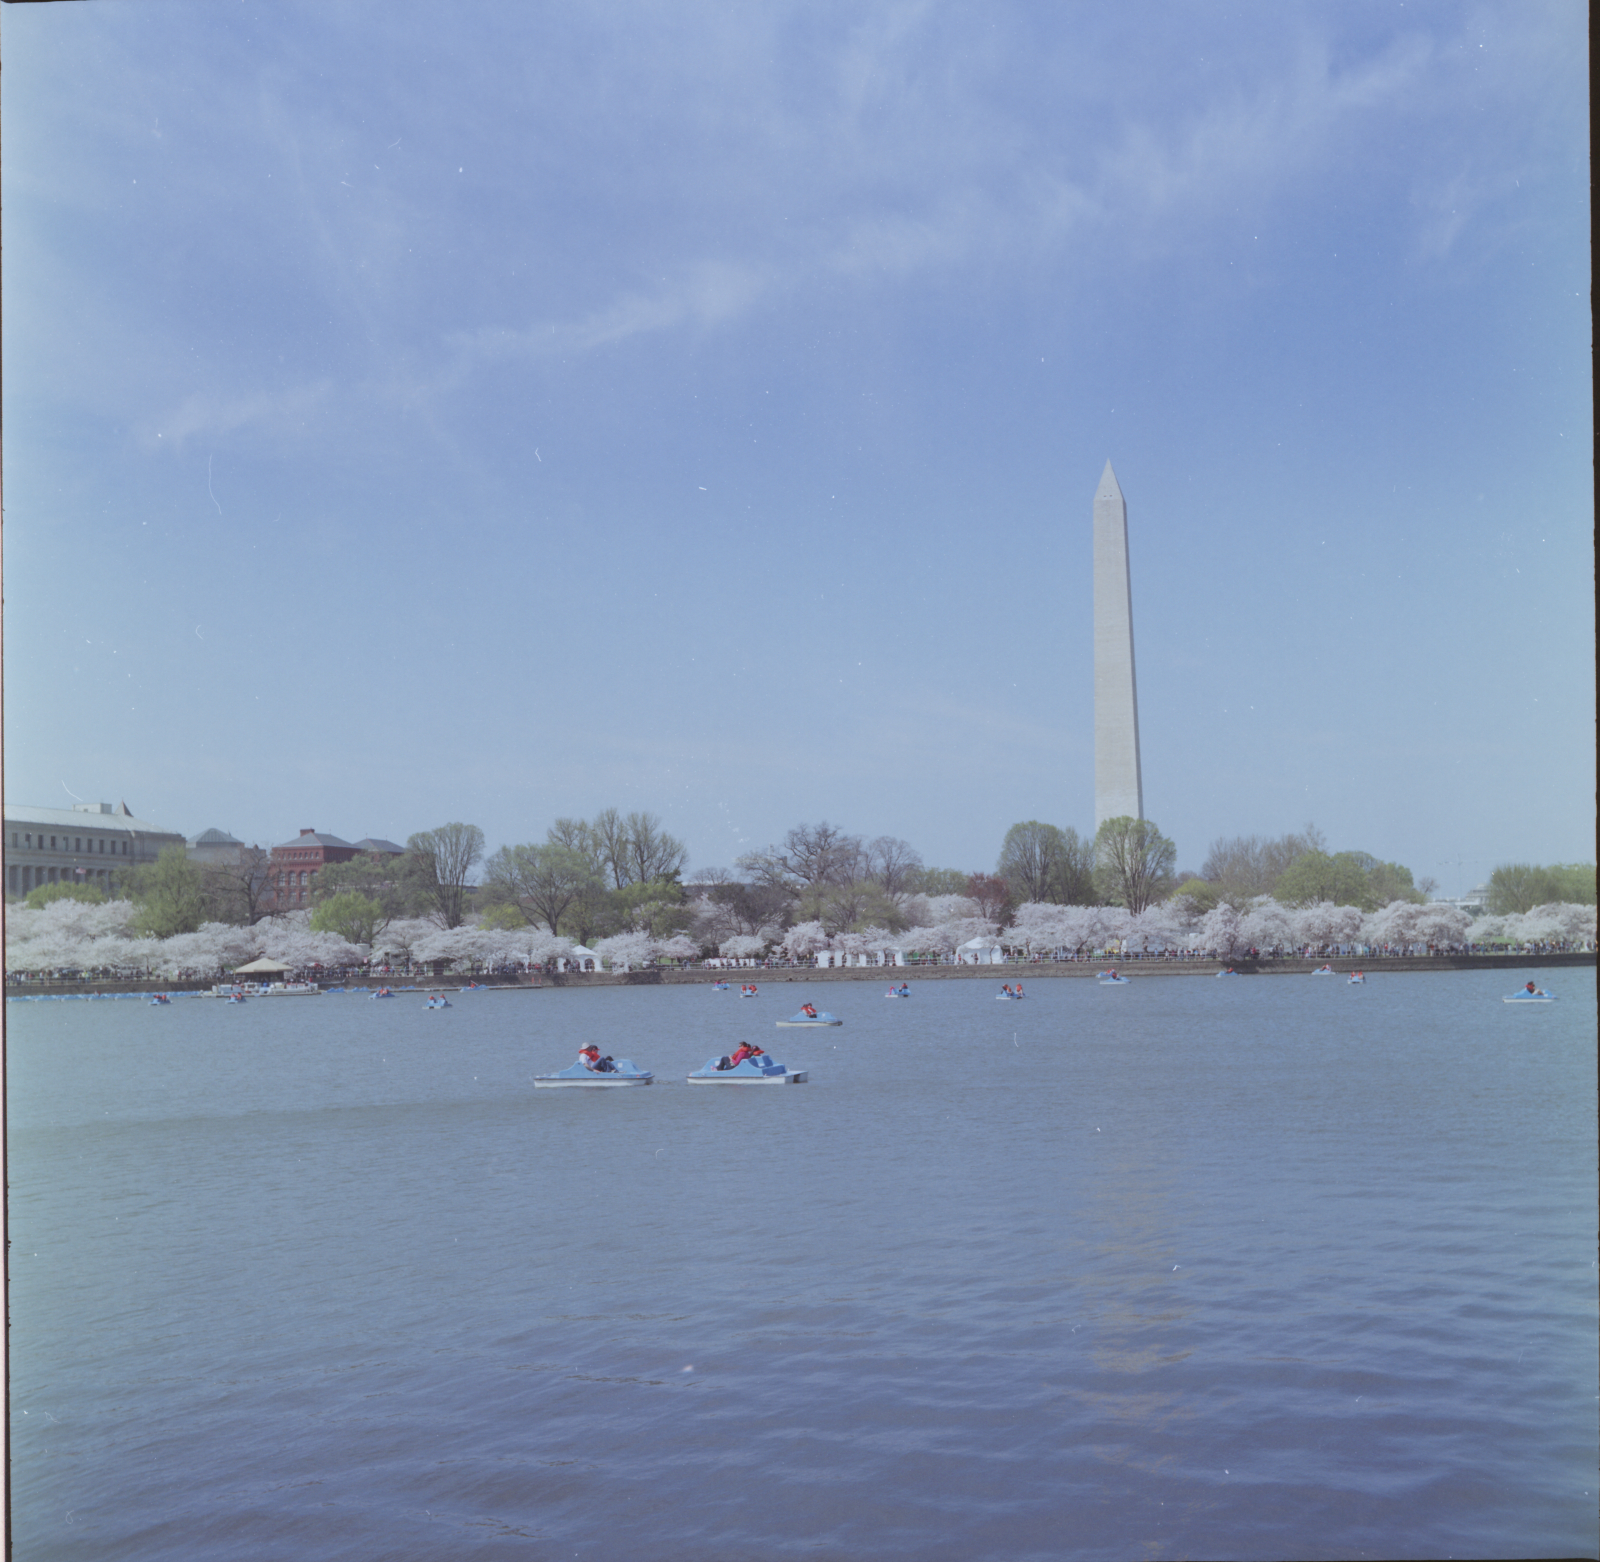 Paddle boats at the Cherry Blossom Festival